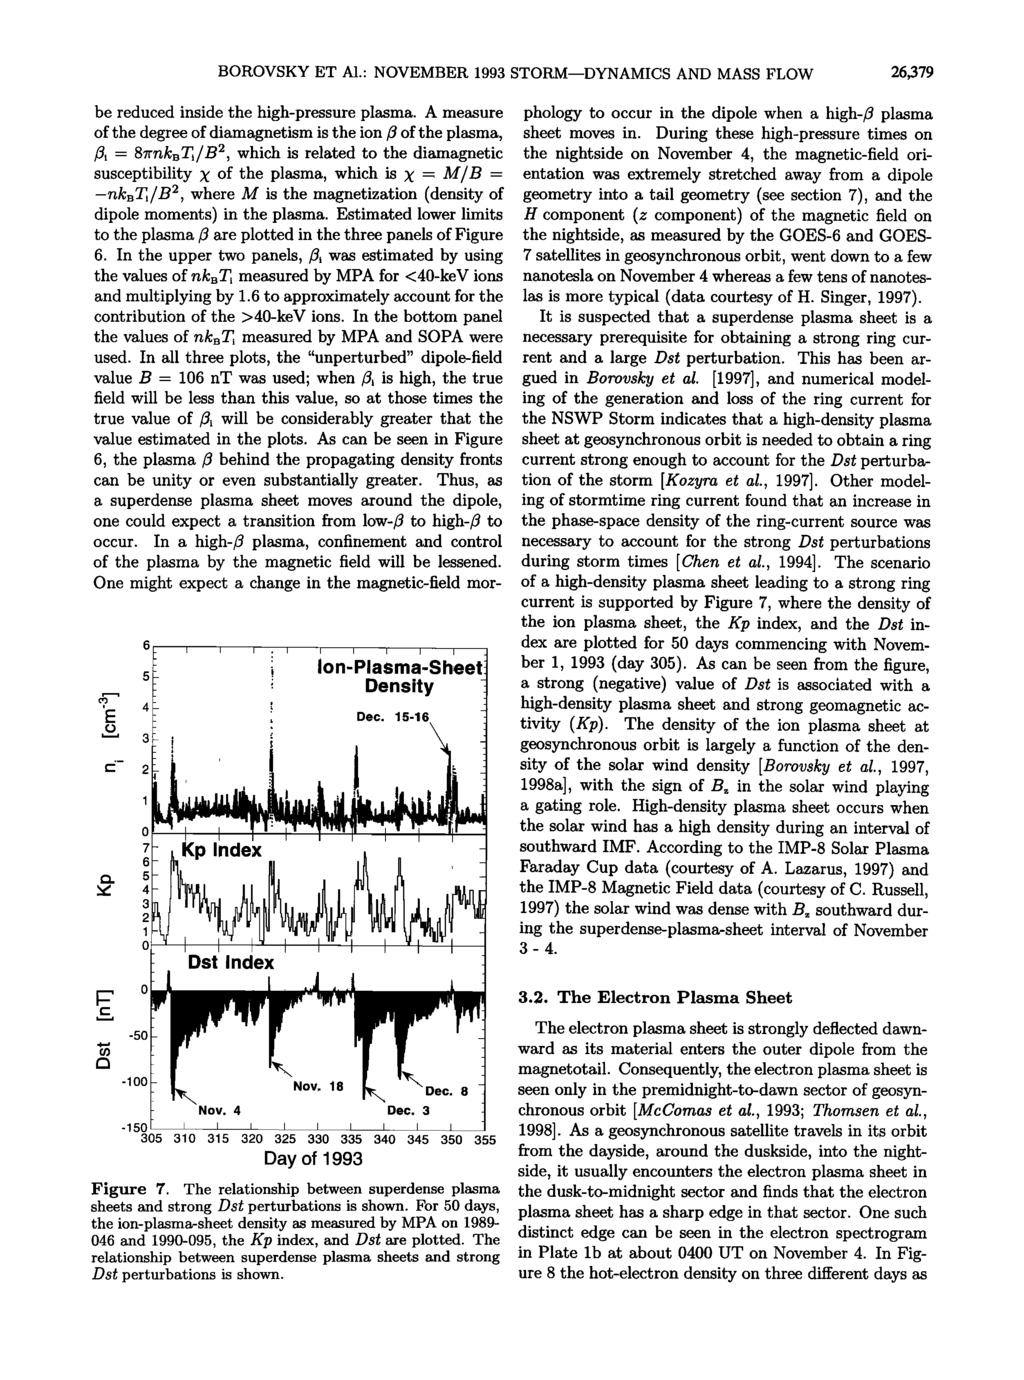 _ BOROVSKY ET A1' NOVEMBER 1993 STORM--DYNAMICS AND MASS FLOW 26,379 be reduced inside the high-pressure plasma A measure of the degree of aliamagnetism is the ion of the plasma, phology to occur in